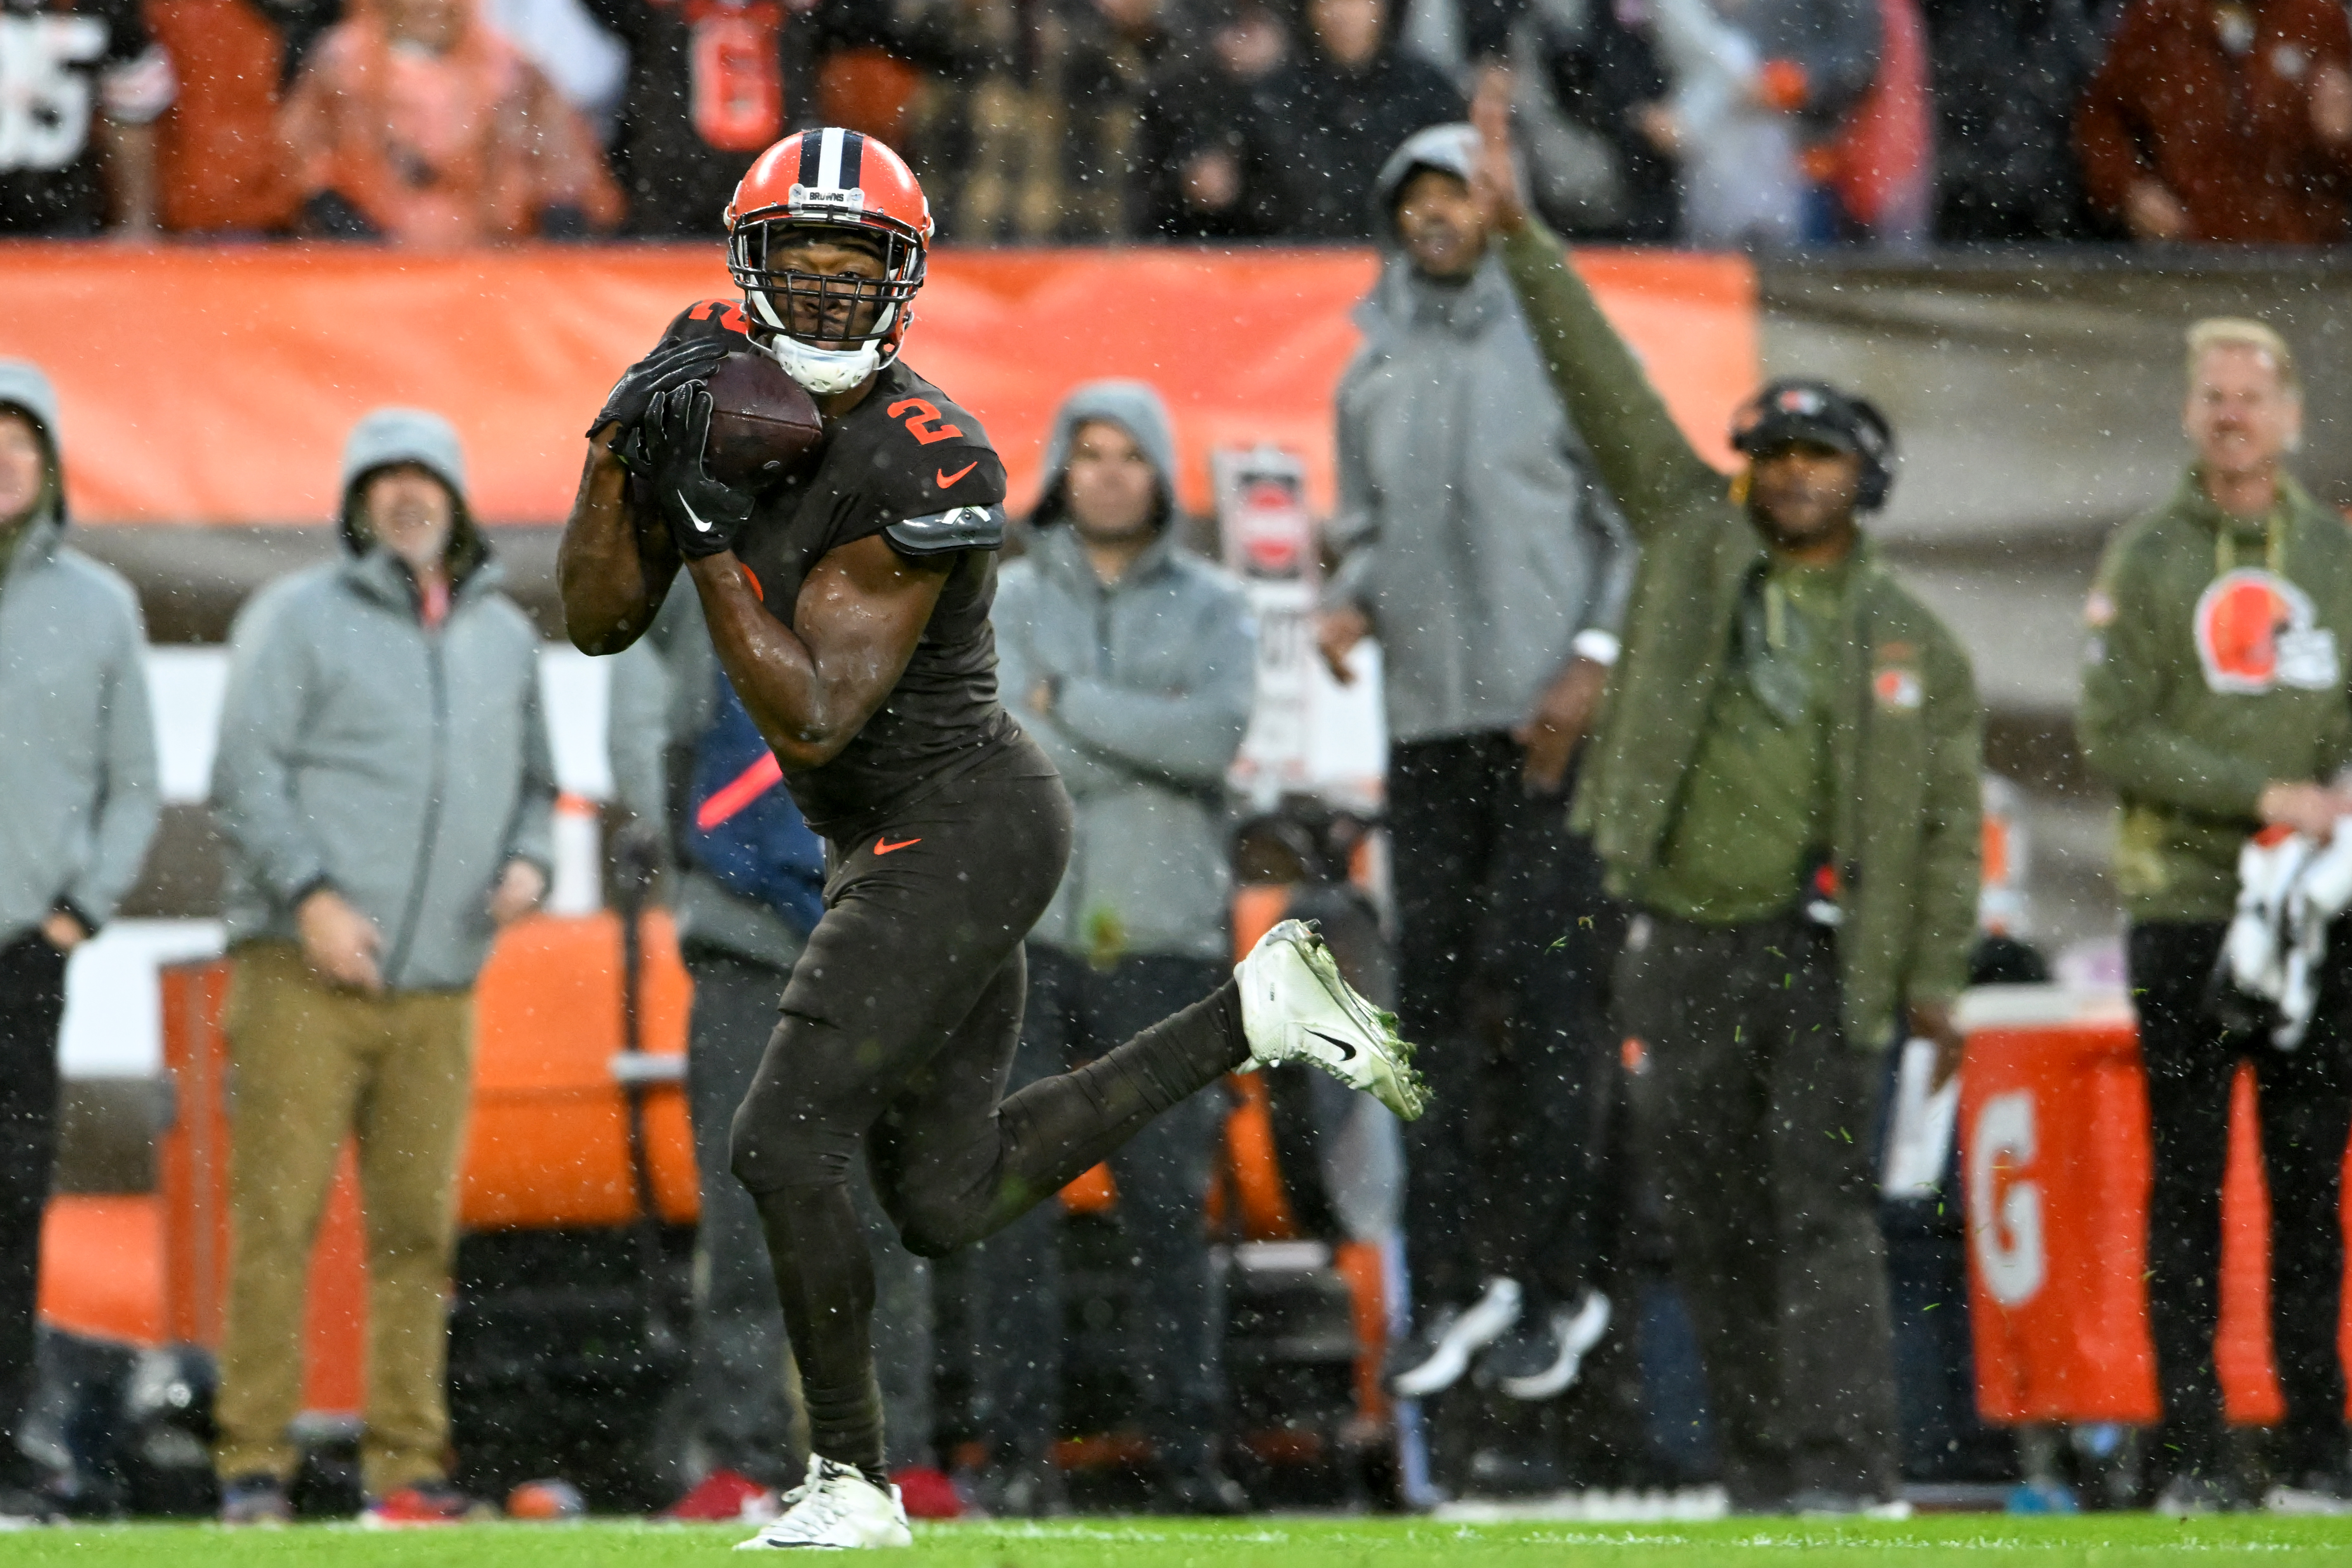 Amari Cooper #2 of the Cleveland Browns catches a pass during overtime against the Tampa Bay Buccaneers at FirstEnergy Stadium on November 27, 2022 in Cleveland, Ohio.